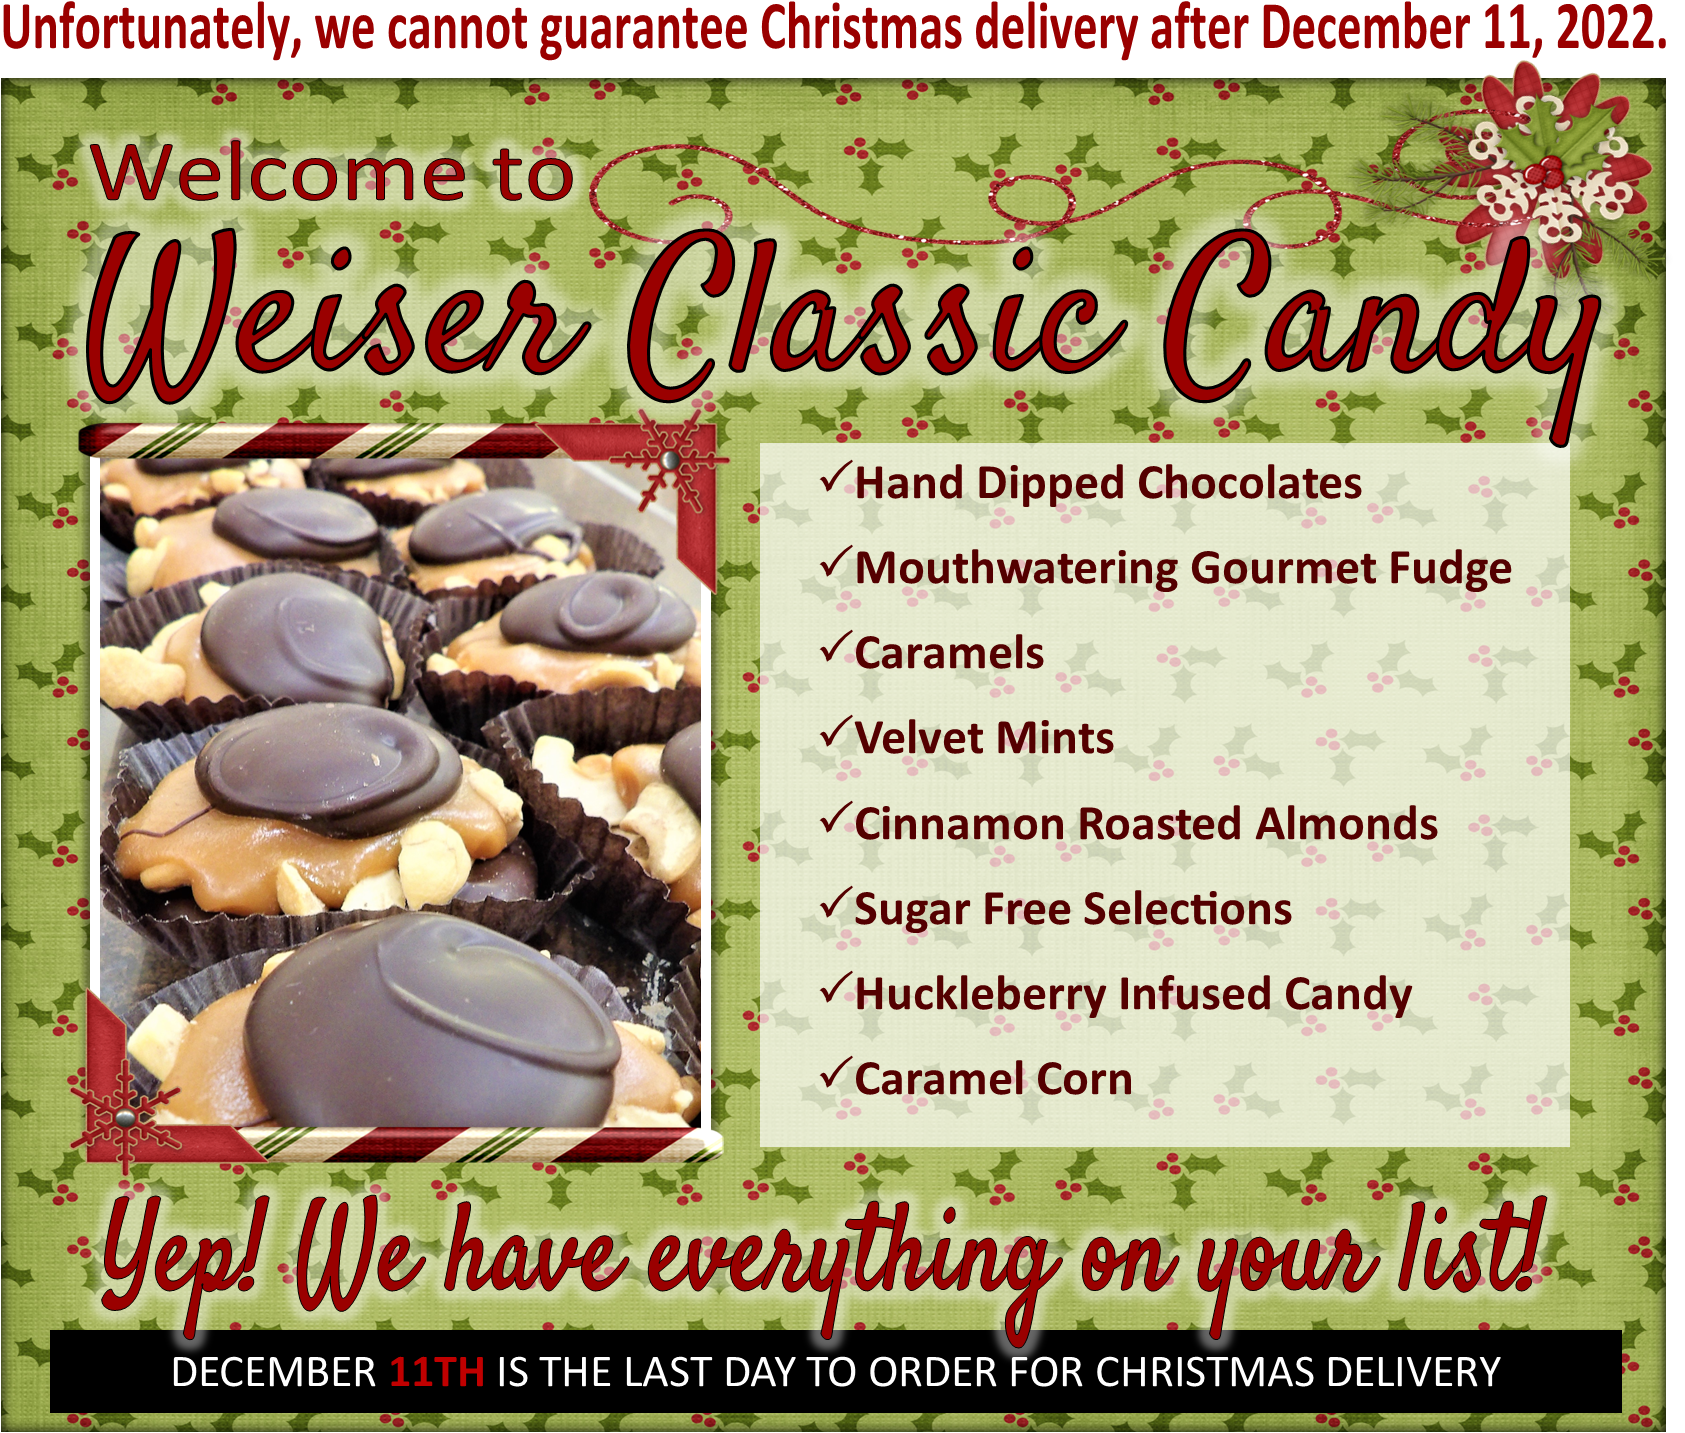 wcc-christmas-2022-home-page-update.png